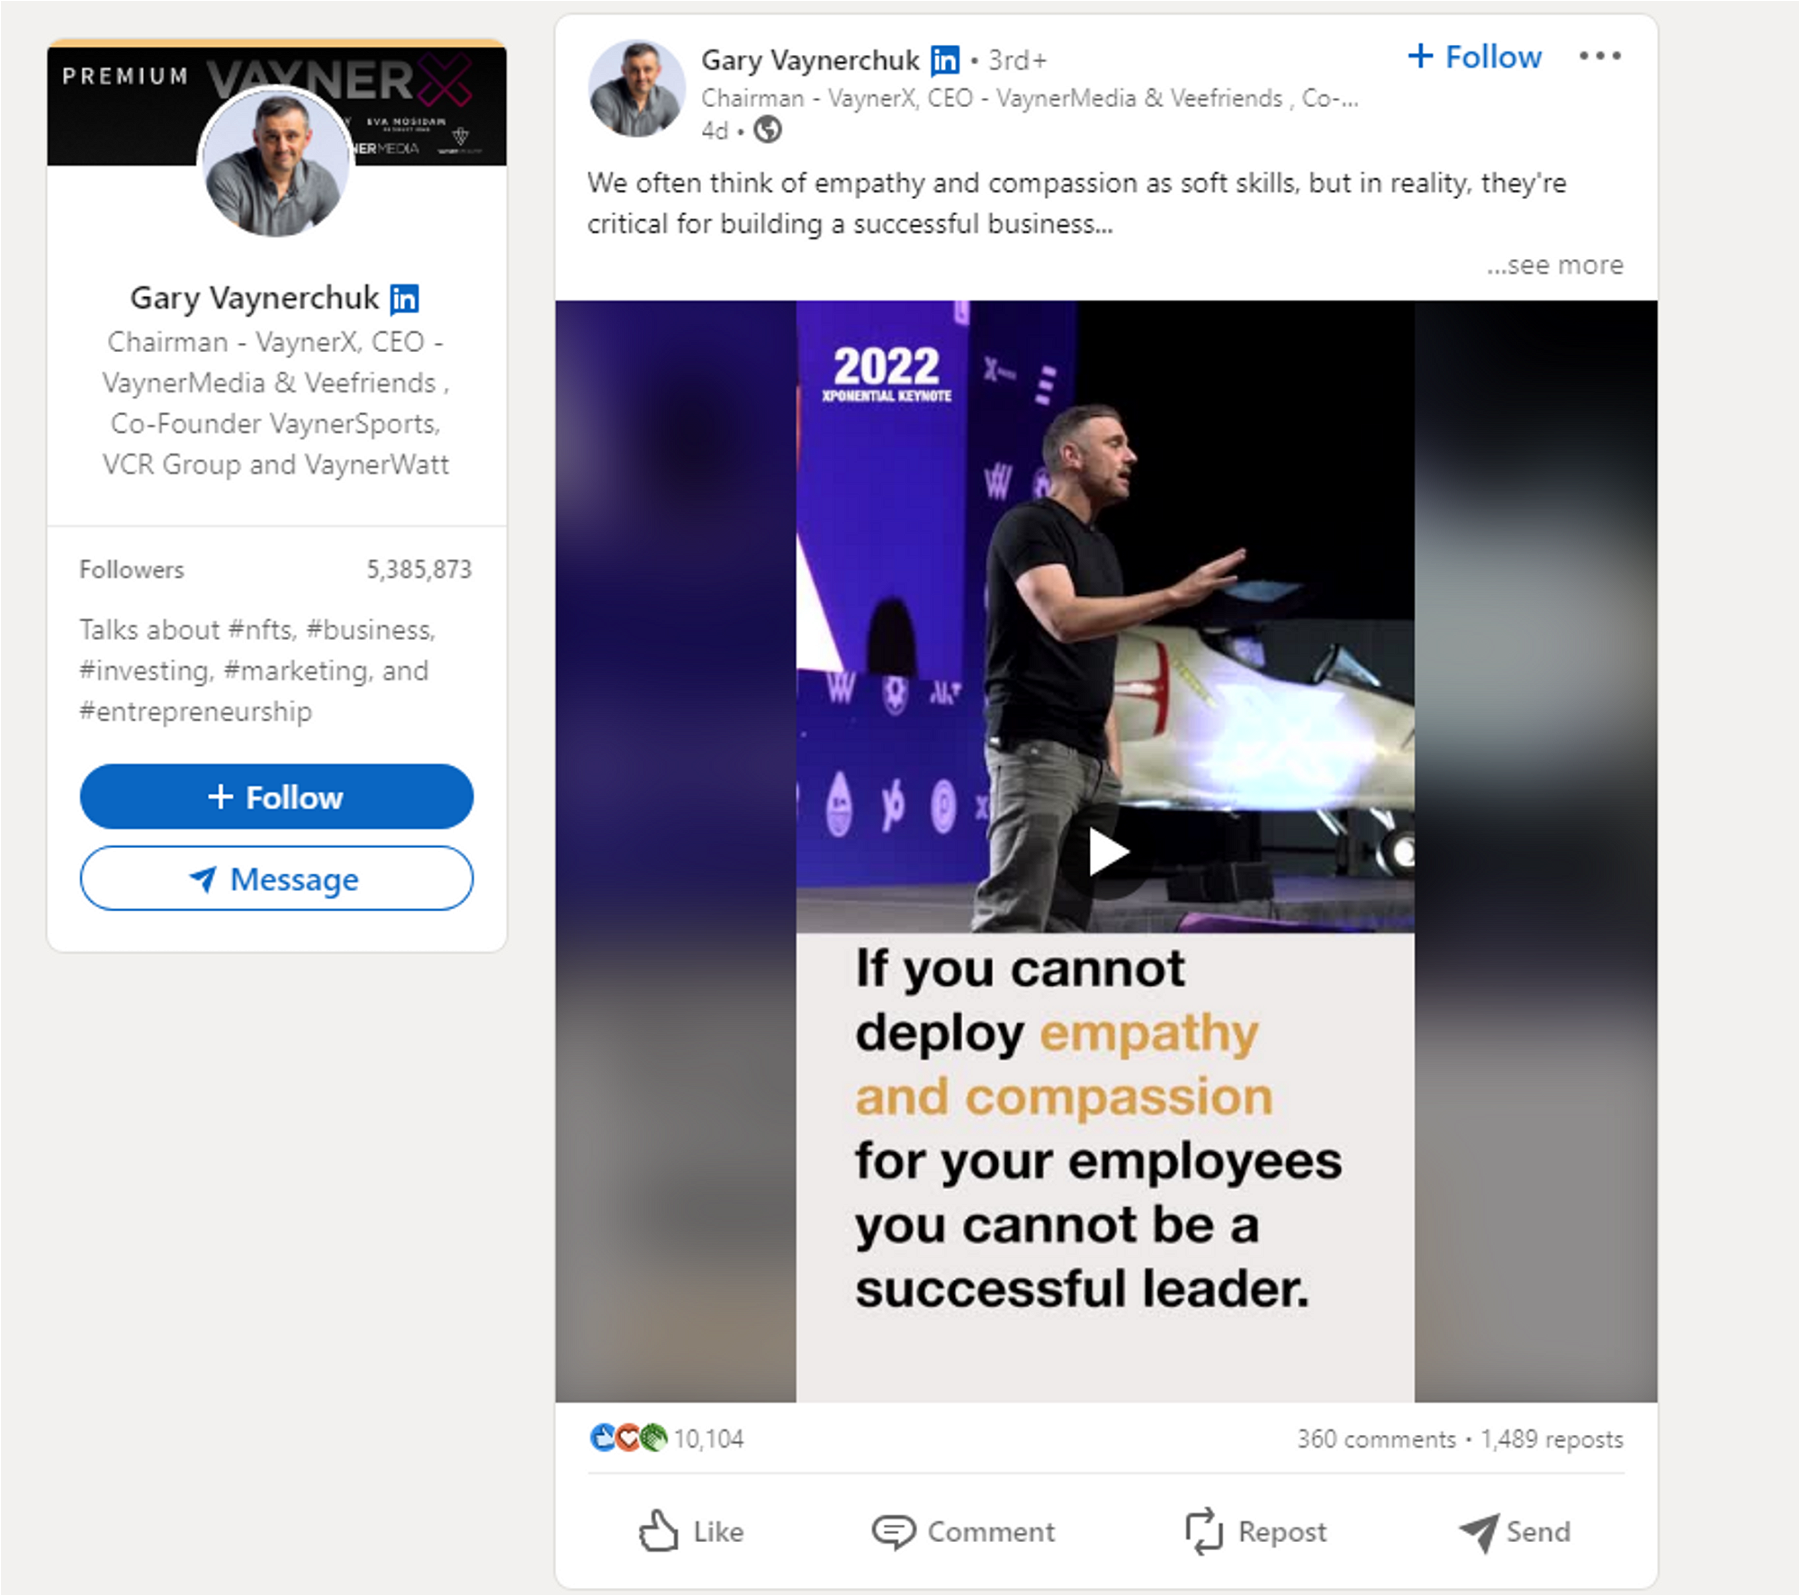 Gary Vaynerchuk uses visual content to boost the organic reach of his posts.